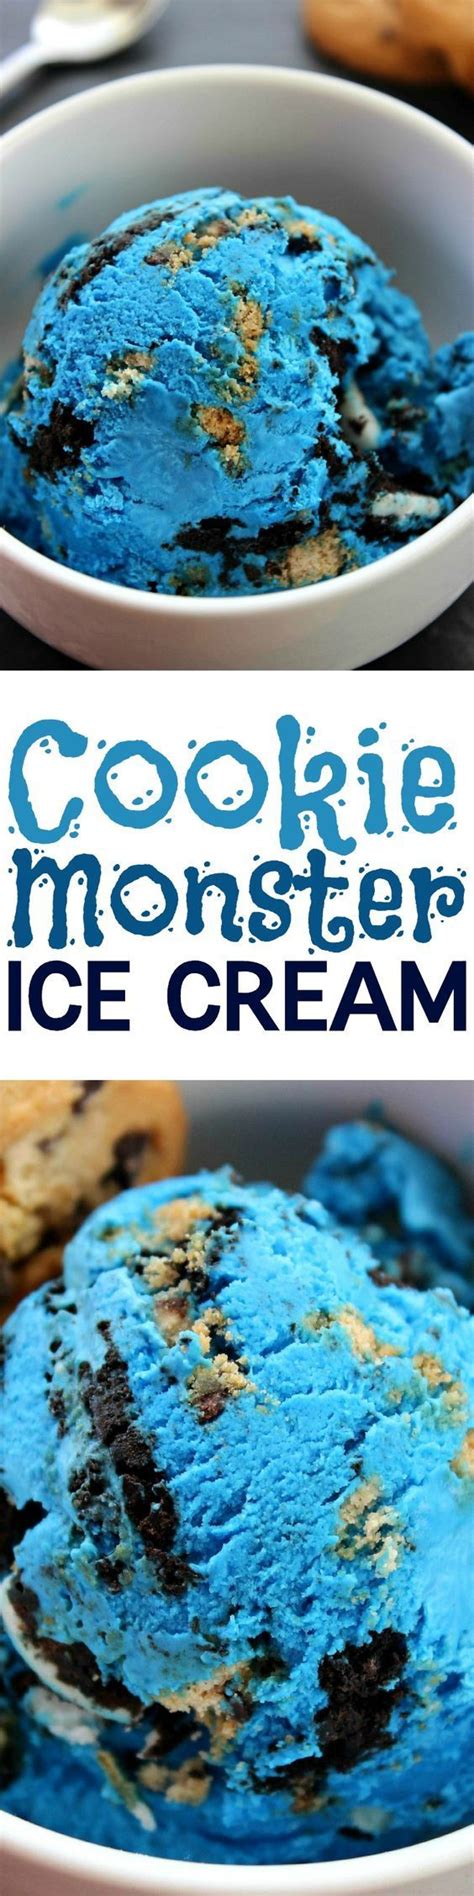 Homemade Cookie Monster Ice Cream Baking Beauty Cookie Monster Ice